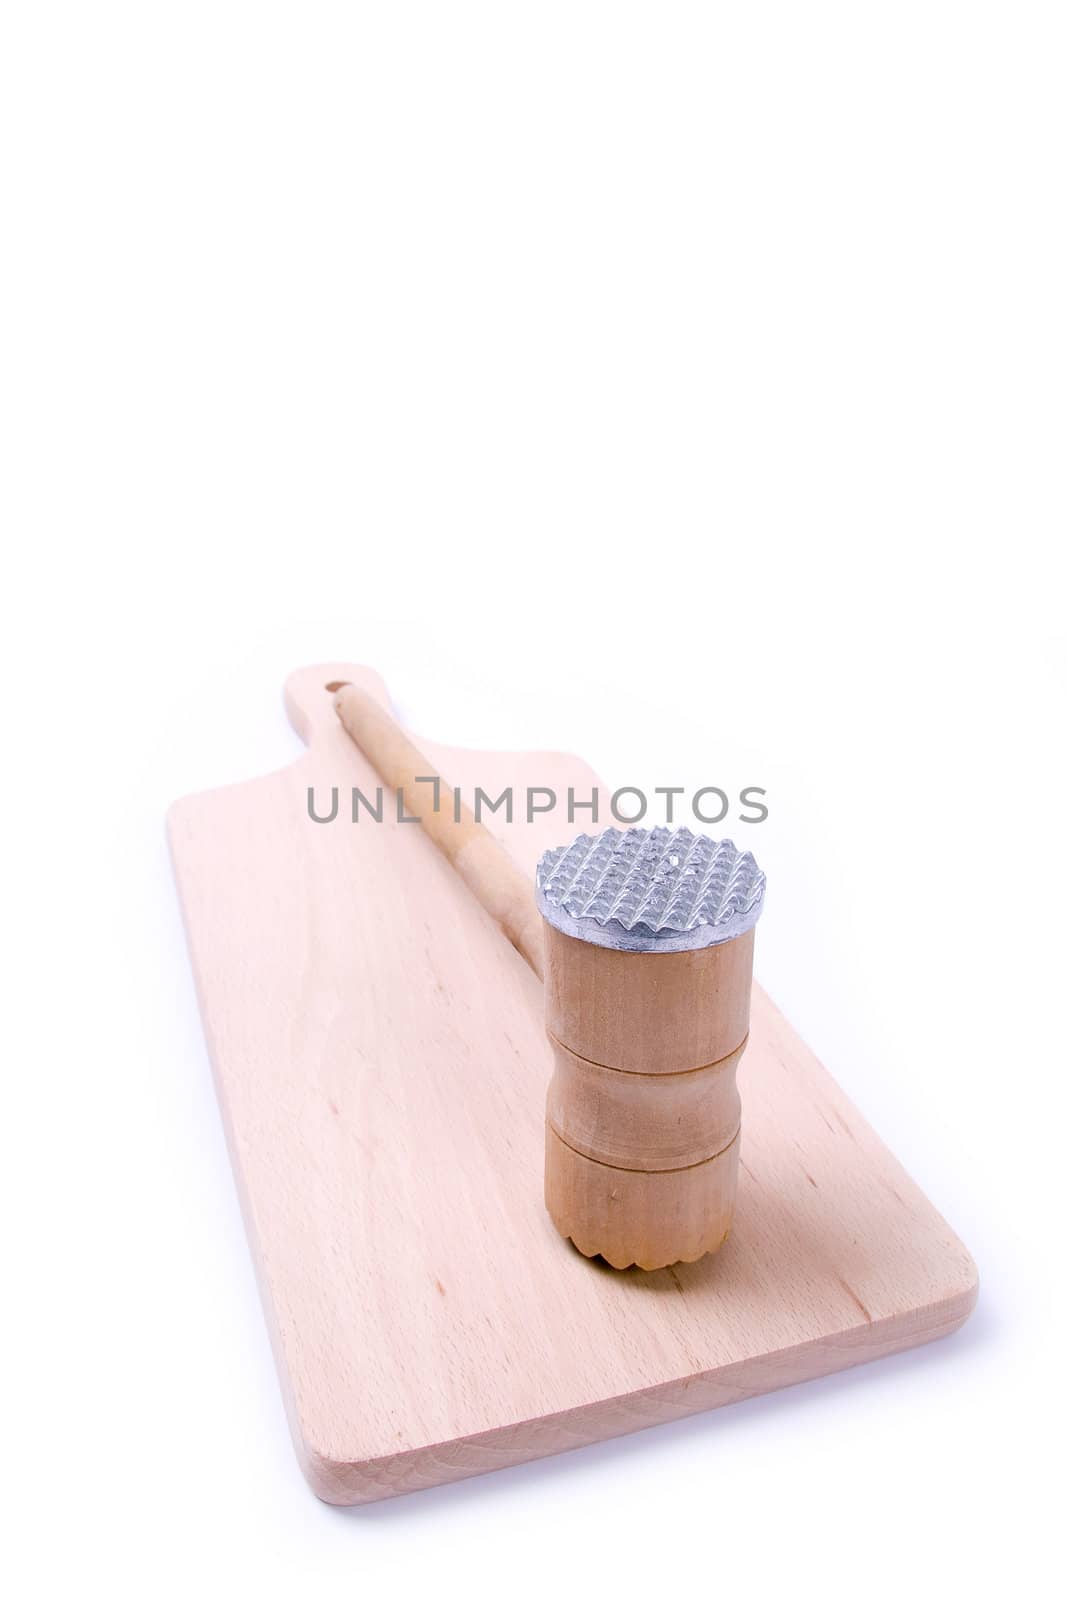 Wooden meat hammer on kitchen board isolated on white background.